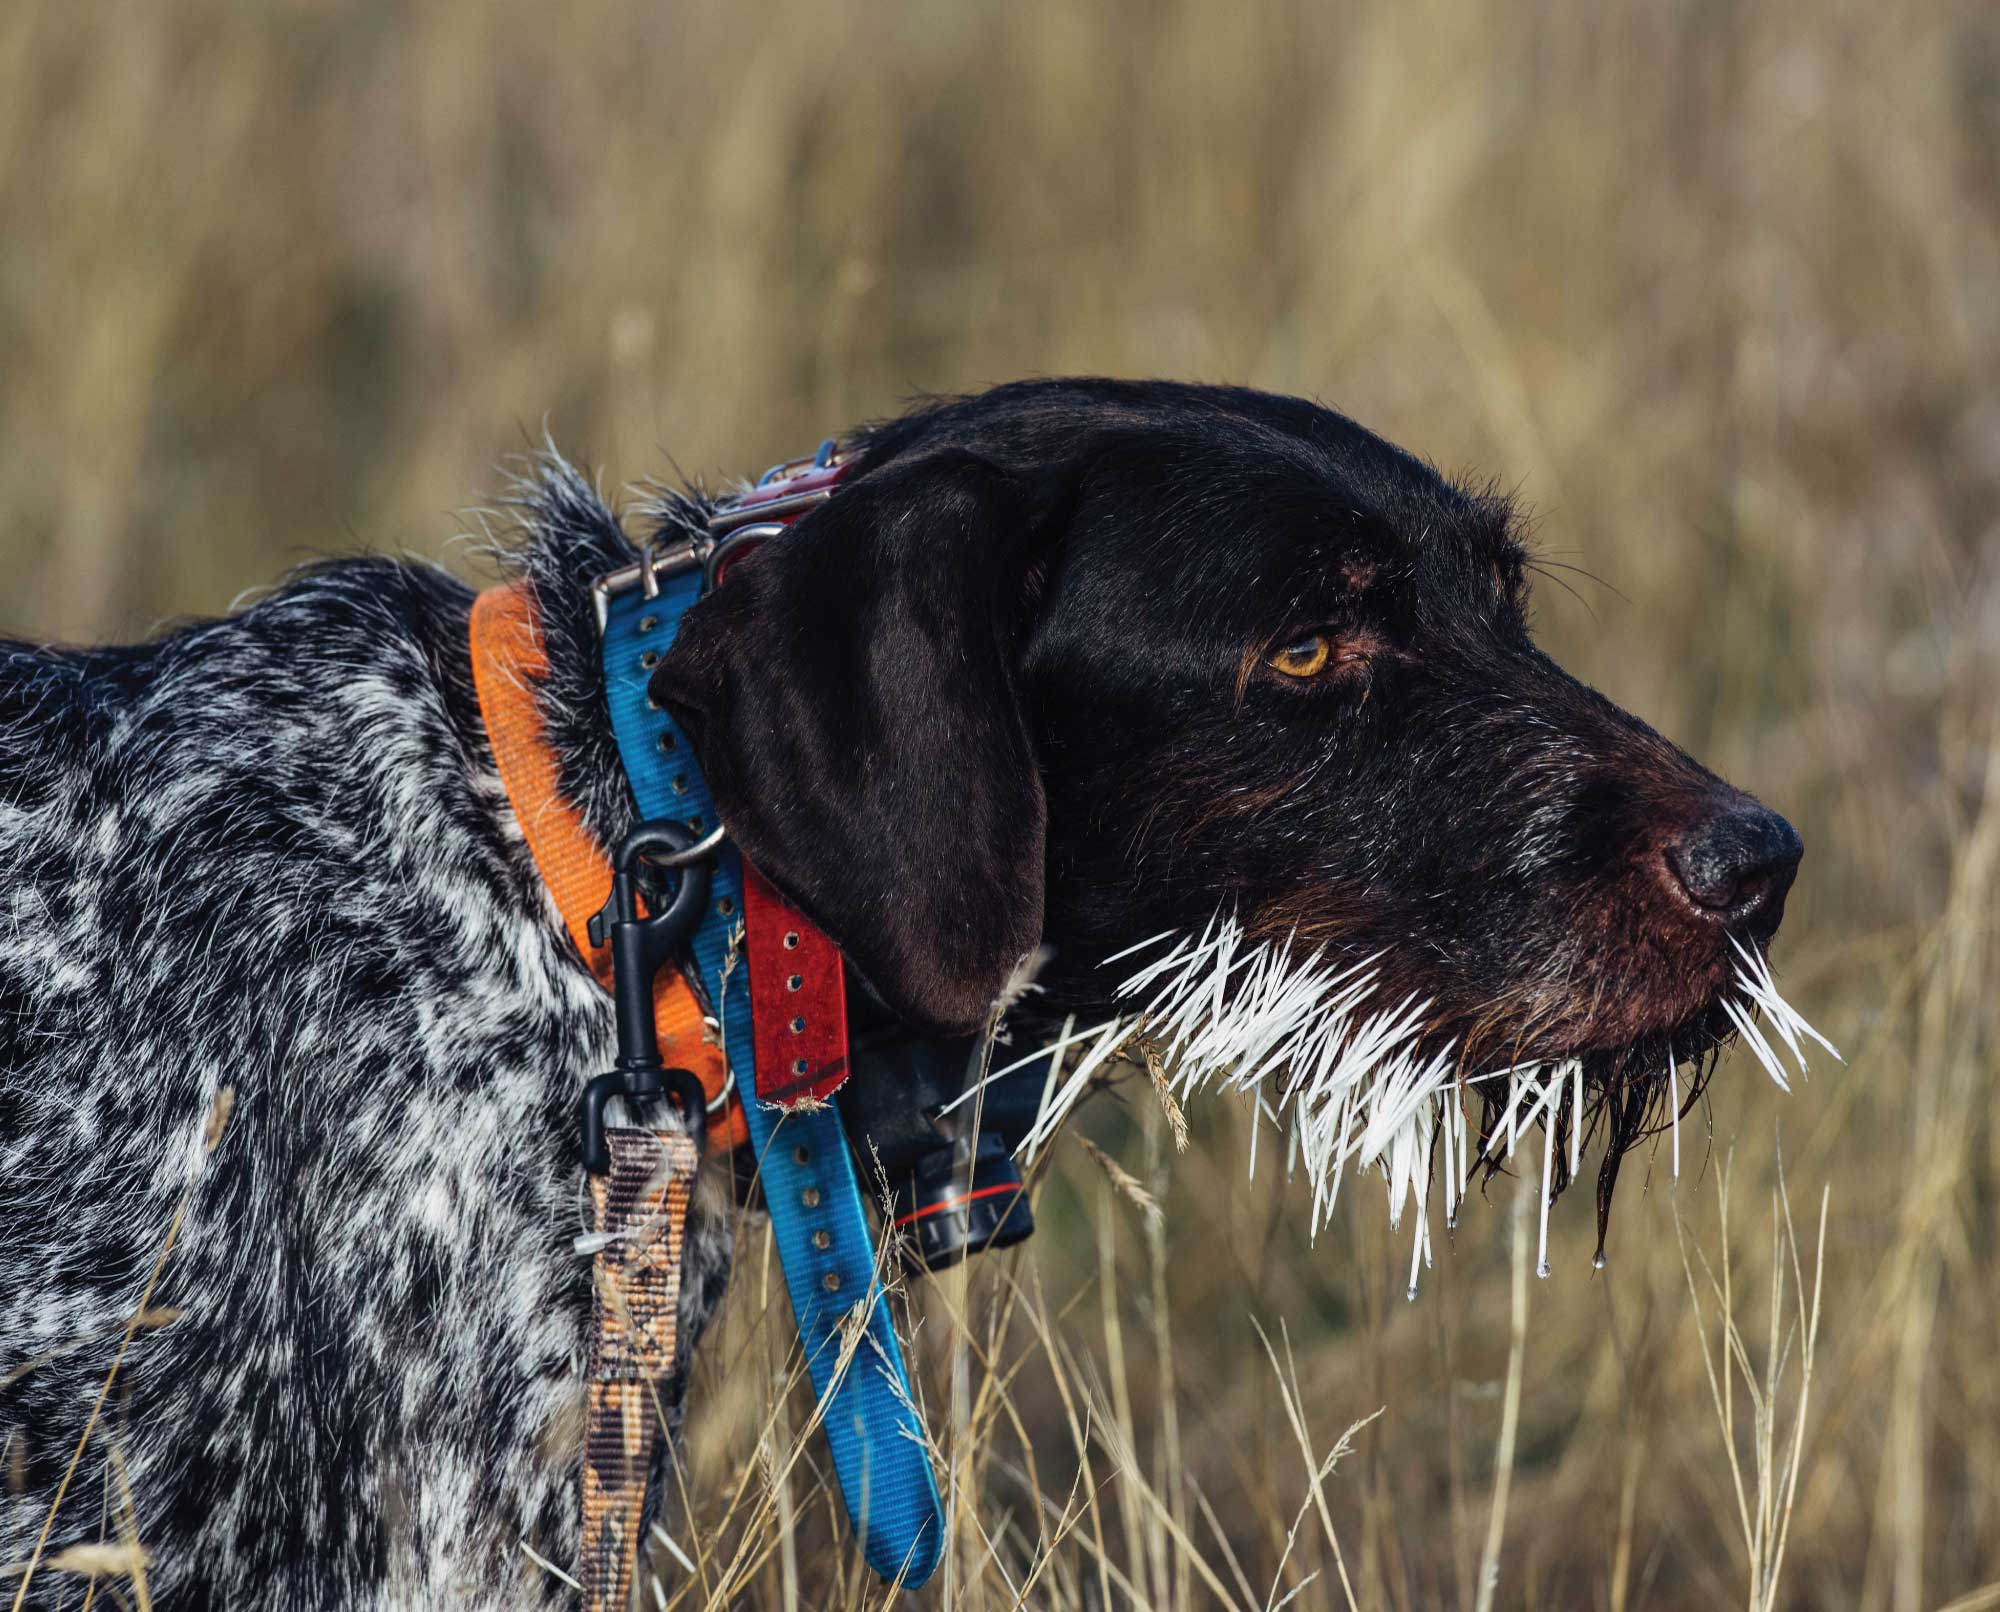 Porcupine Quills in Dogs: What You Need to Know